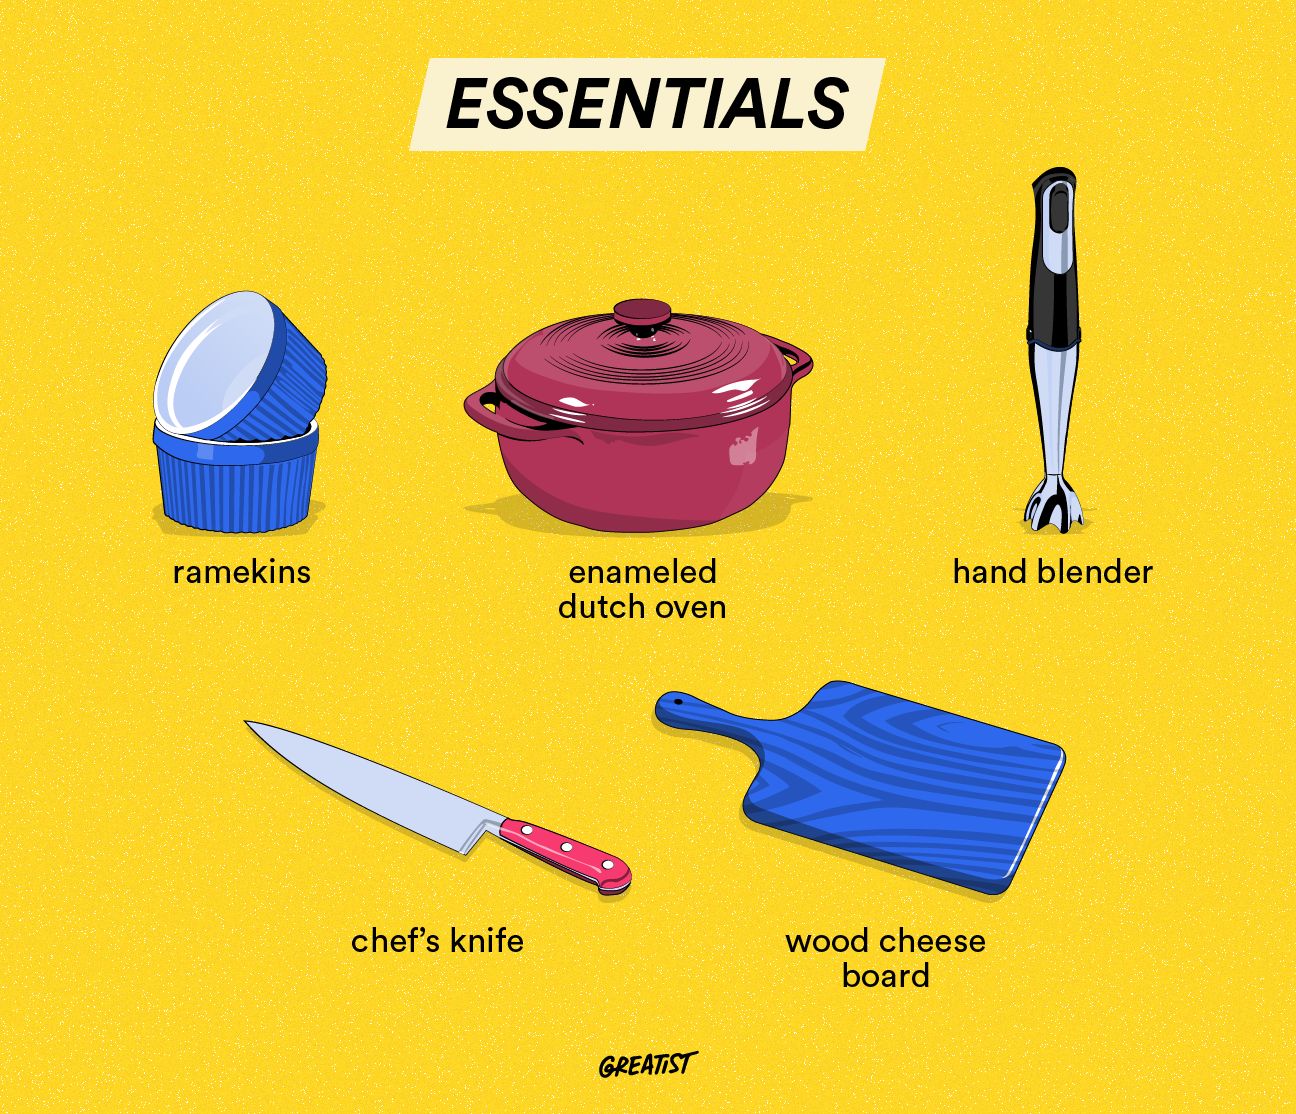 https://media.post.rvohealth.io/wp-content/uploads/sites/2/2020/11/162799-We-Oui-A-Starter-Guide-to-French-Kitchen-Essentials-1296x1114-Essentials-Body.png.png